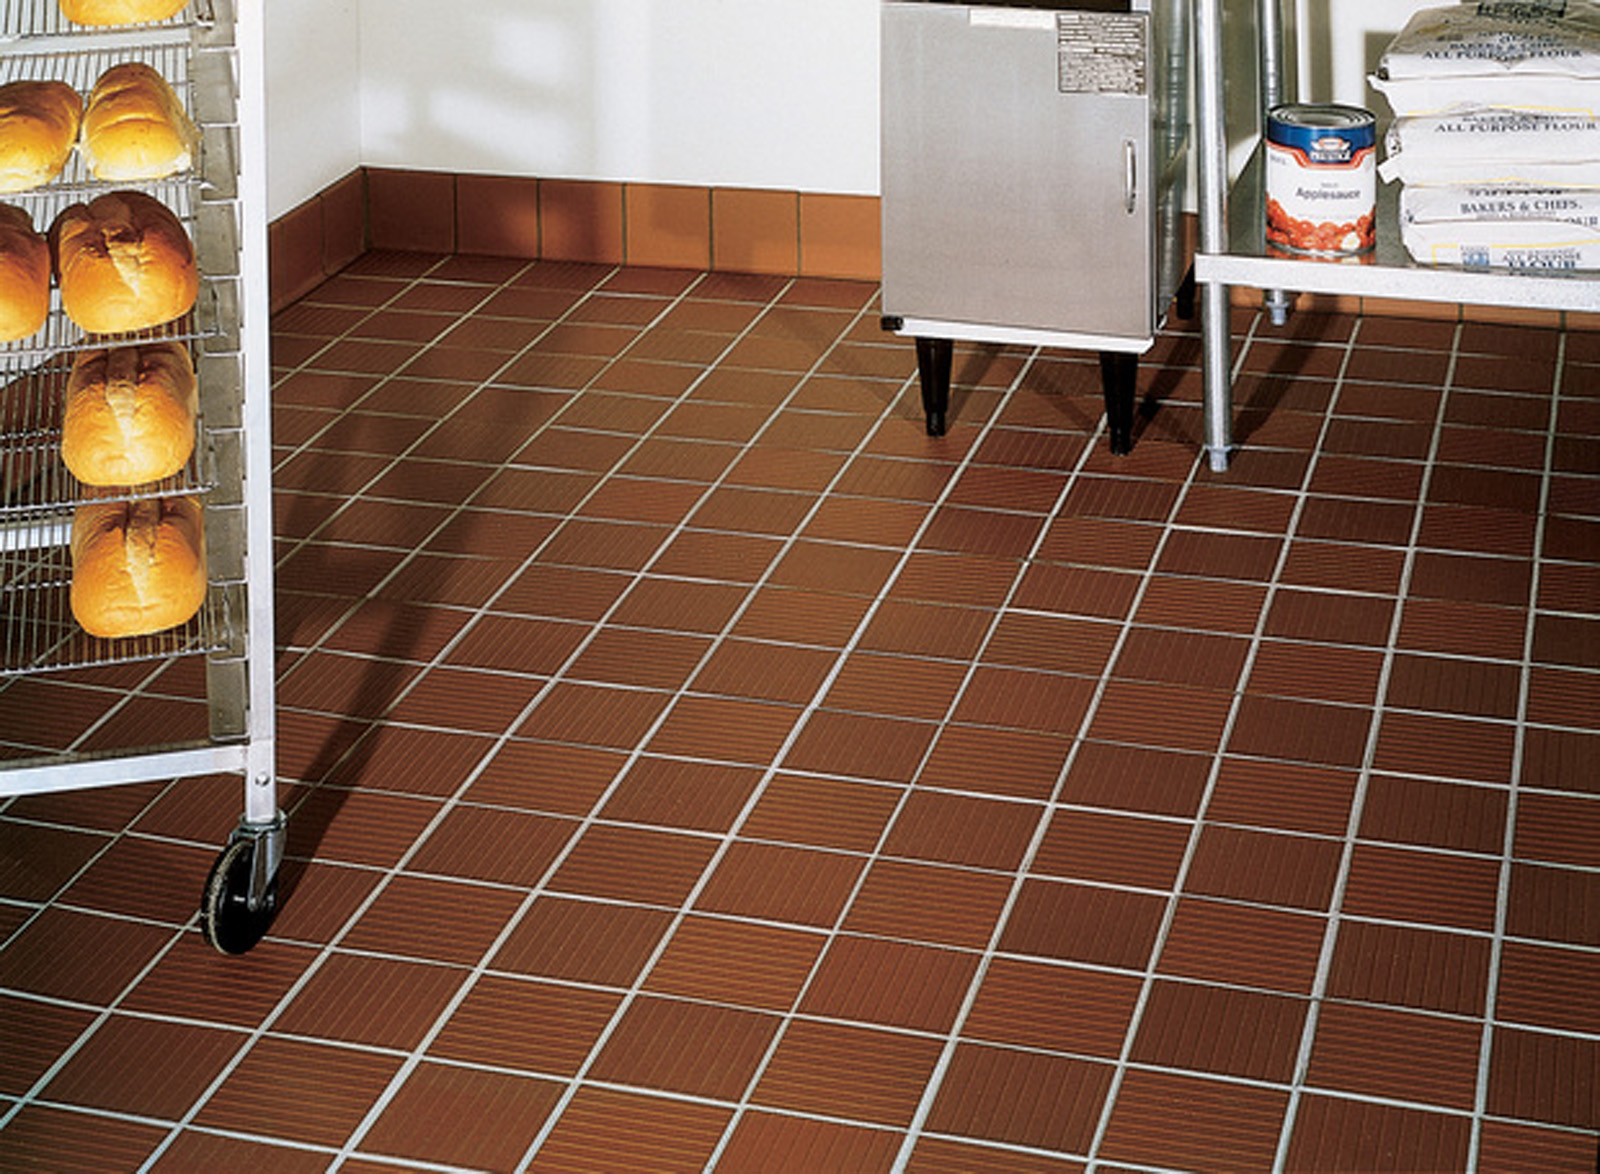 Ceramic Tile Products